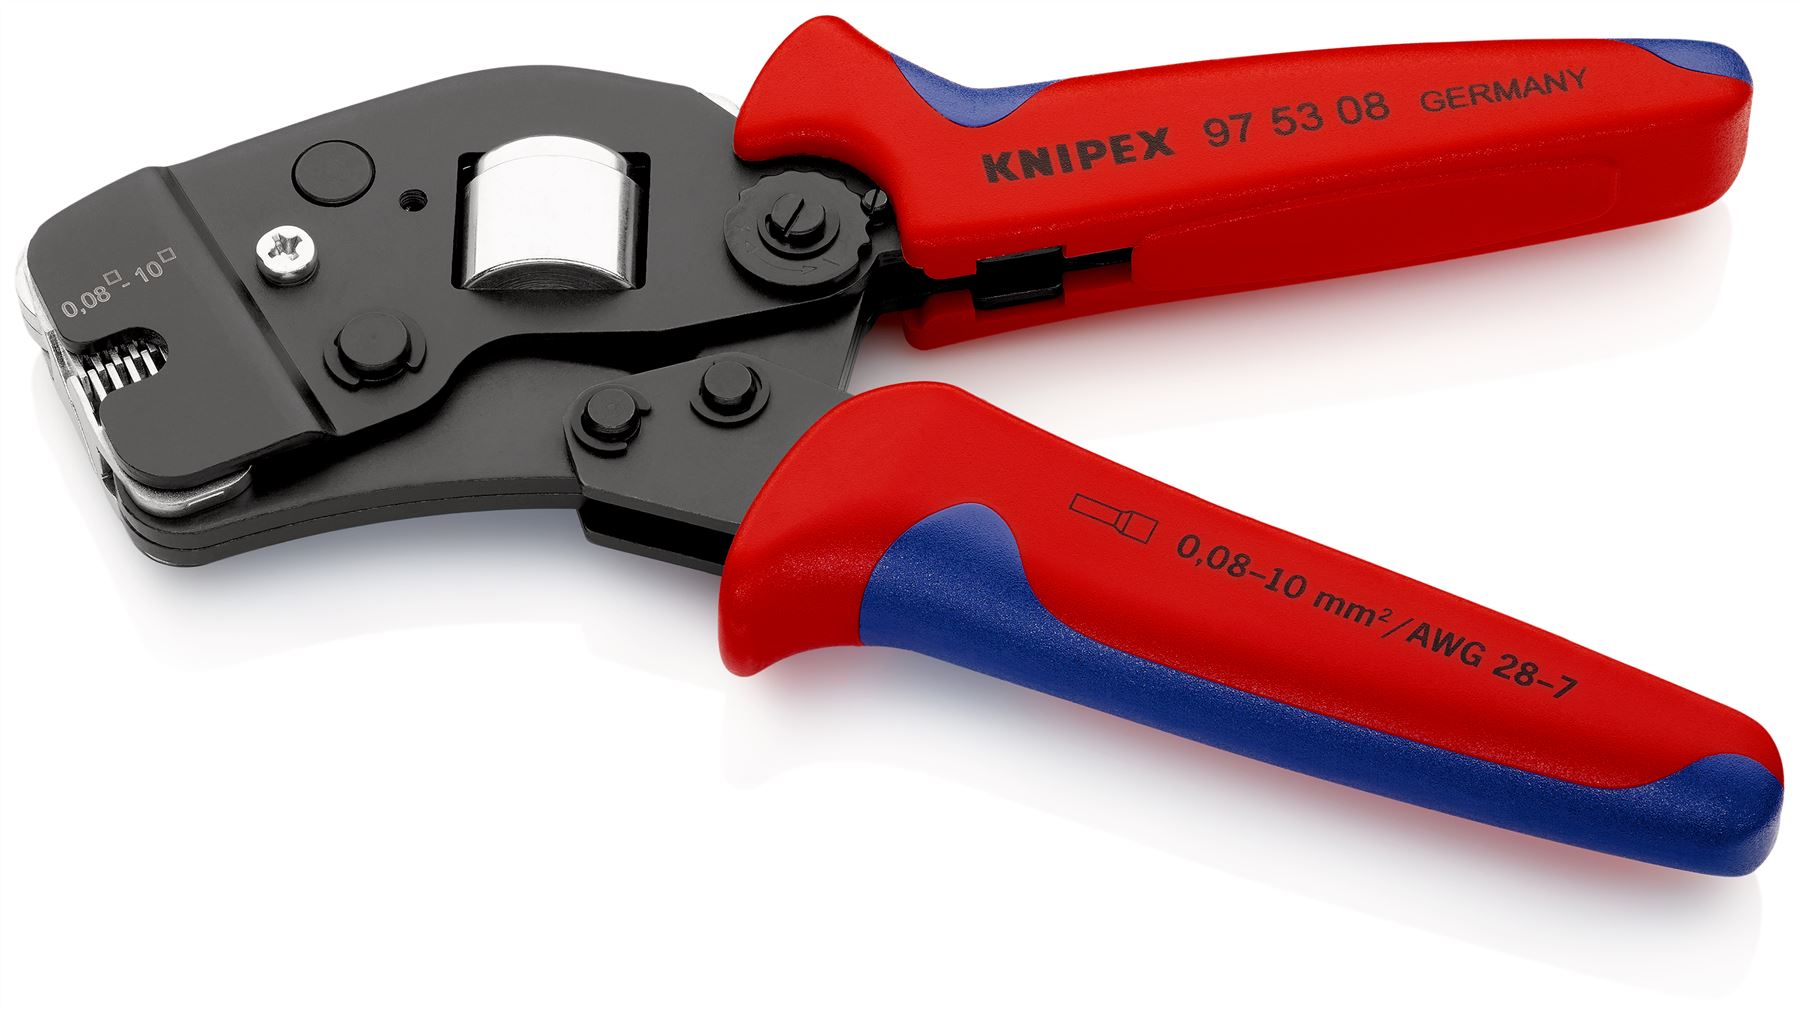 KNIPEX Self Adjusting Crimping Pliers for Wire Ferrules with Front Loading 0.08-10mm² 190mm Multi Component Grips 97 53 08